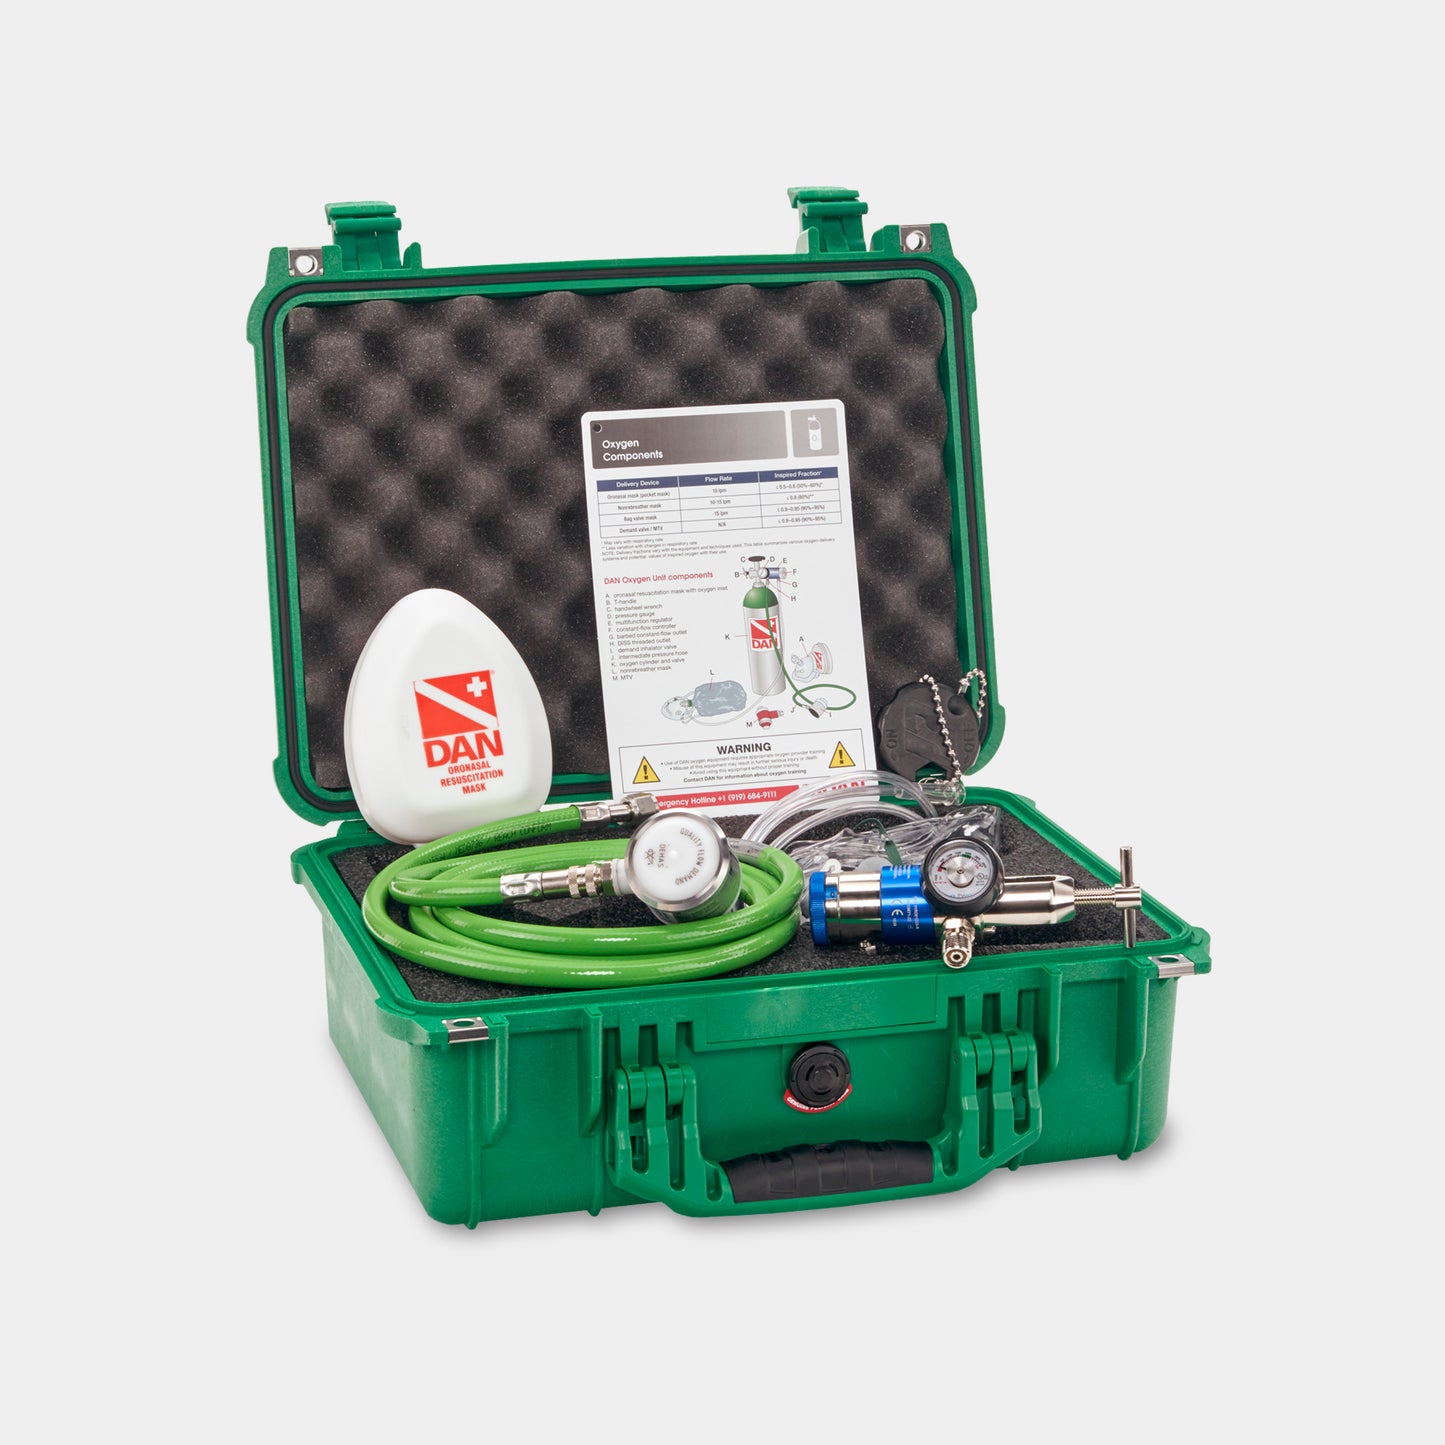 DAN Rescue Pack with No Cylinder - Standard Version